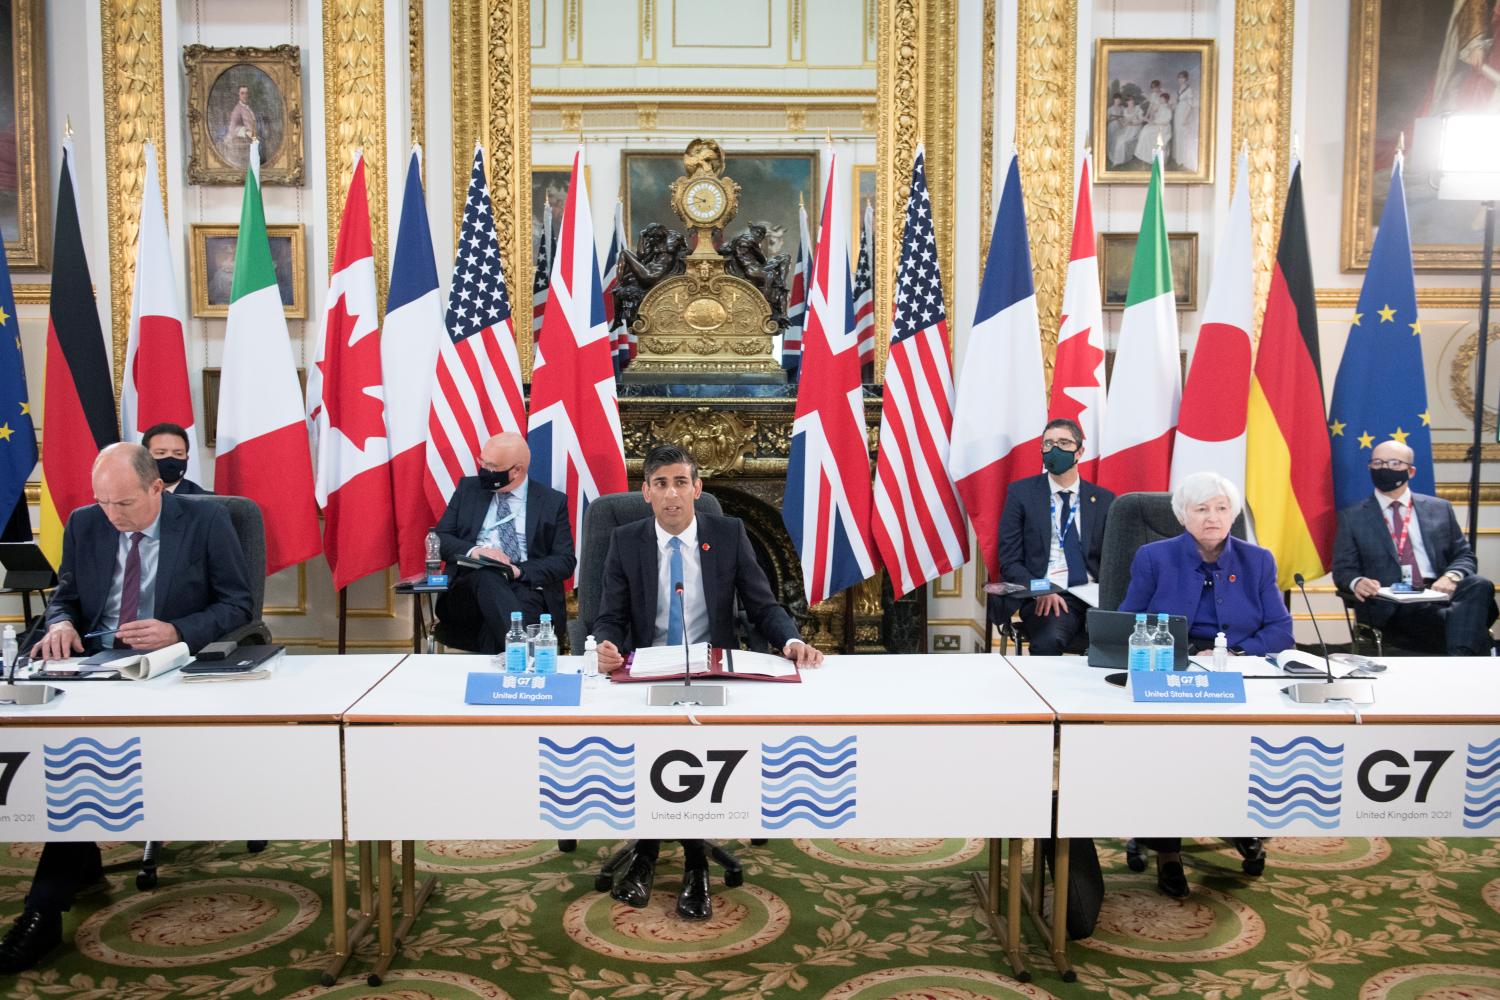 Britain's Chancellor of the Exchequer Rishi Sunak speaks at a meeting of finance ministers from across the G7 nations ahead of the G7 leaders' summit, at Lancaster House in London, Britain June 4, 2021. Stefan Rousseau/PA Wire/Pool via REUTERS